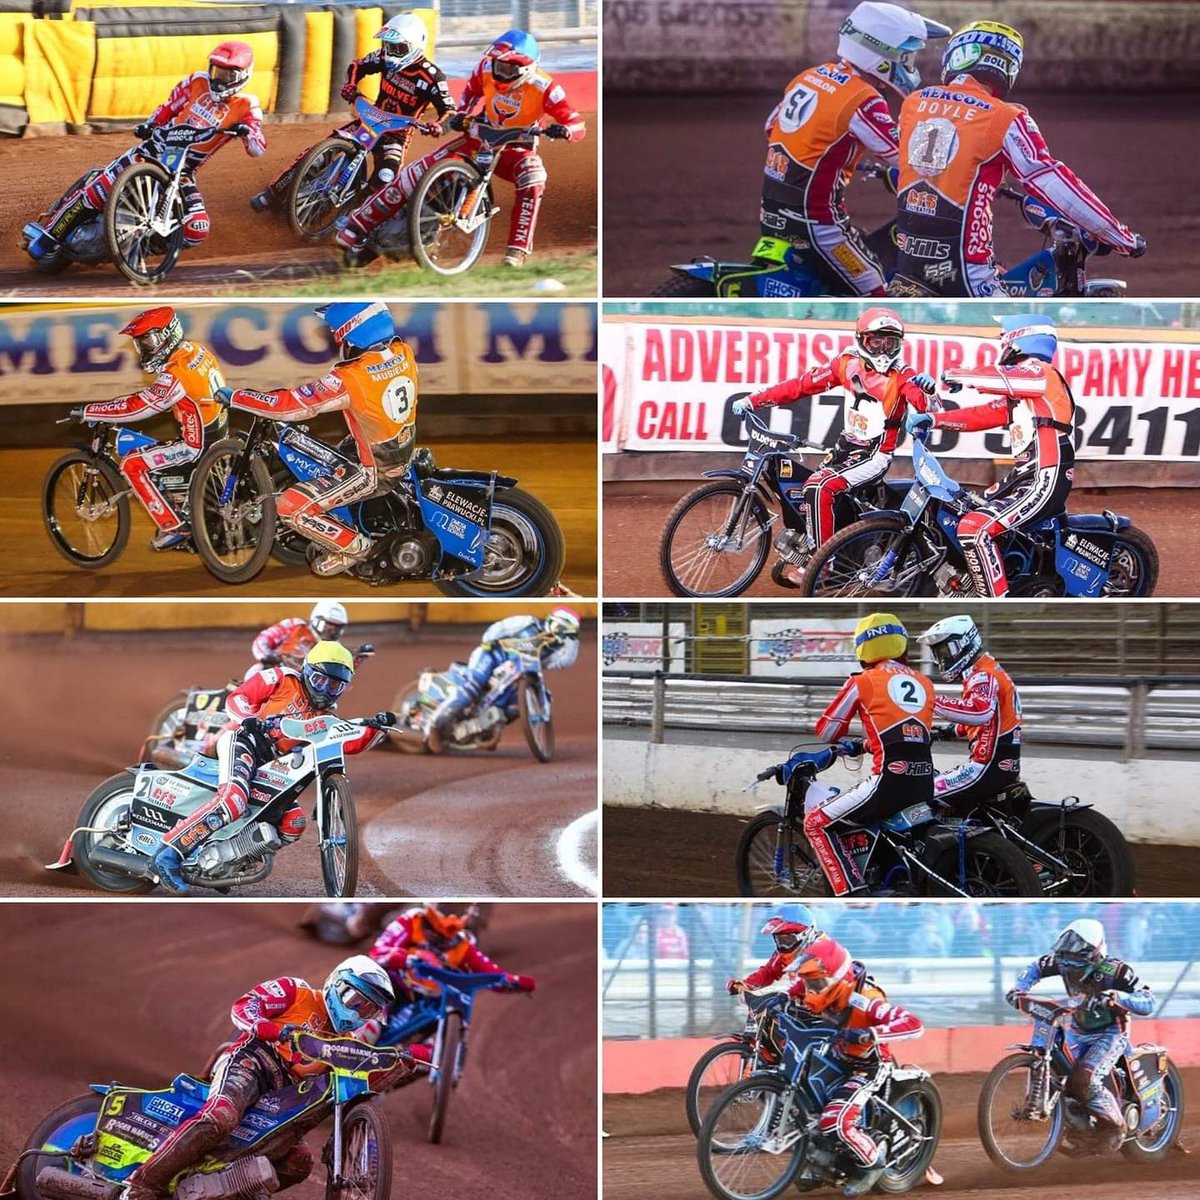 What a year 2019 was for the Swindon Robins! 116 days later we are STILL disappointingly waiting for answers on the Abbey @SwindonCouncil @jimrobbins @DanielCllr @JustinTomlinson @swindonadver @BBCWiltsSport @BBCWiltshire  
#SwindonNeedsSpeedway 
#BuildingABetterSwindon